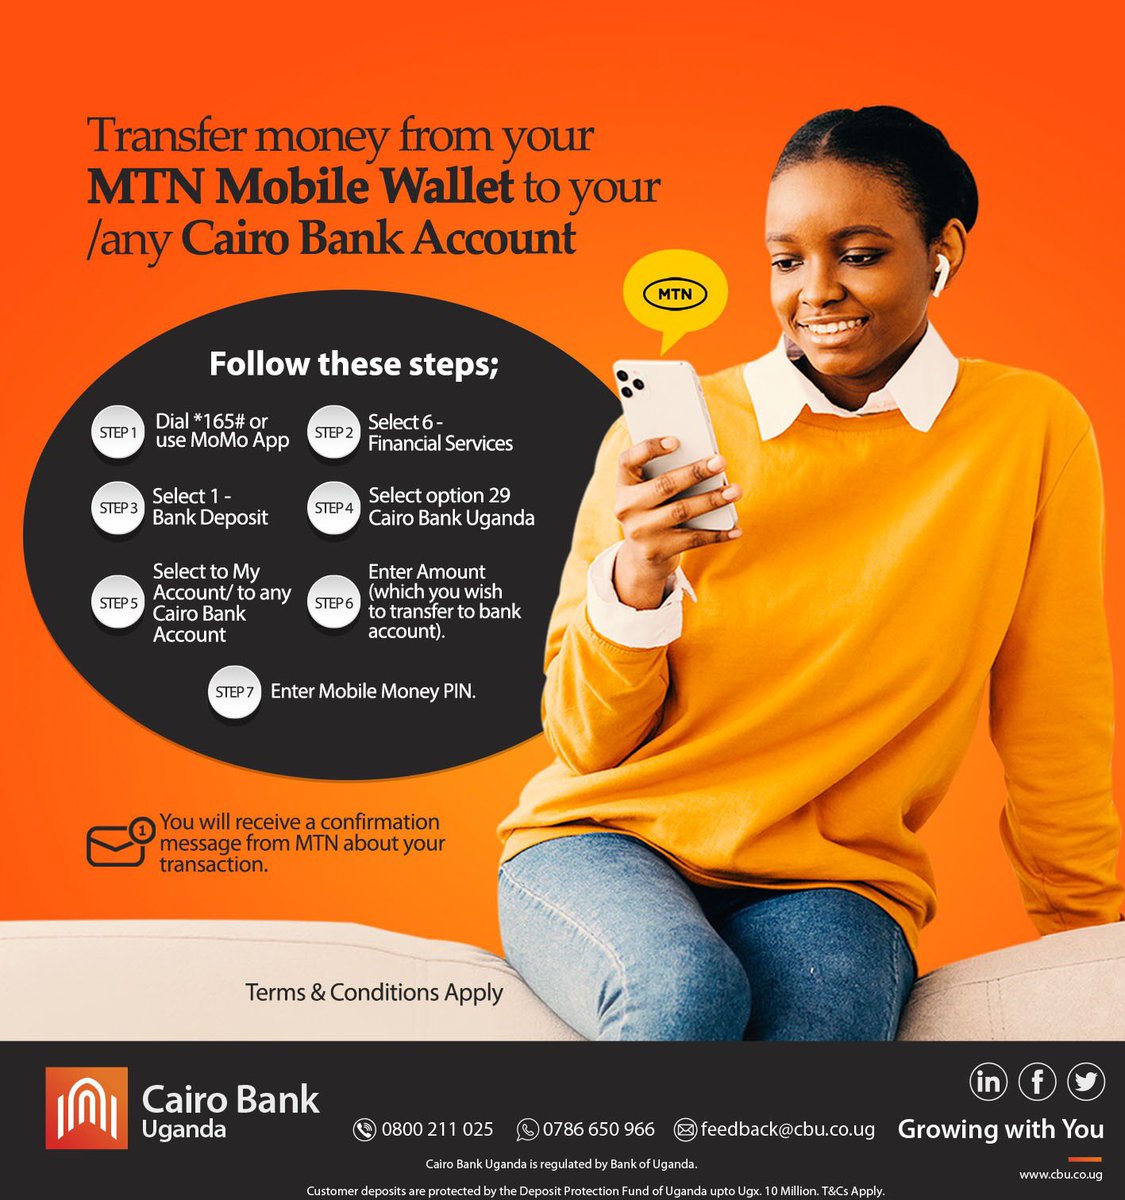 With just dialing 165# or with just a tap on the @mtnug MoMo App, you can be able to carry out money transactions from your MTN Mobile Wallet to your/any Cairo Bank Account.

See poster for guiding steps.

#CairoBank #MTNMobileWallet #CairoBankAccount #MoneyTransfers #Chooseday